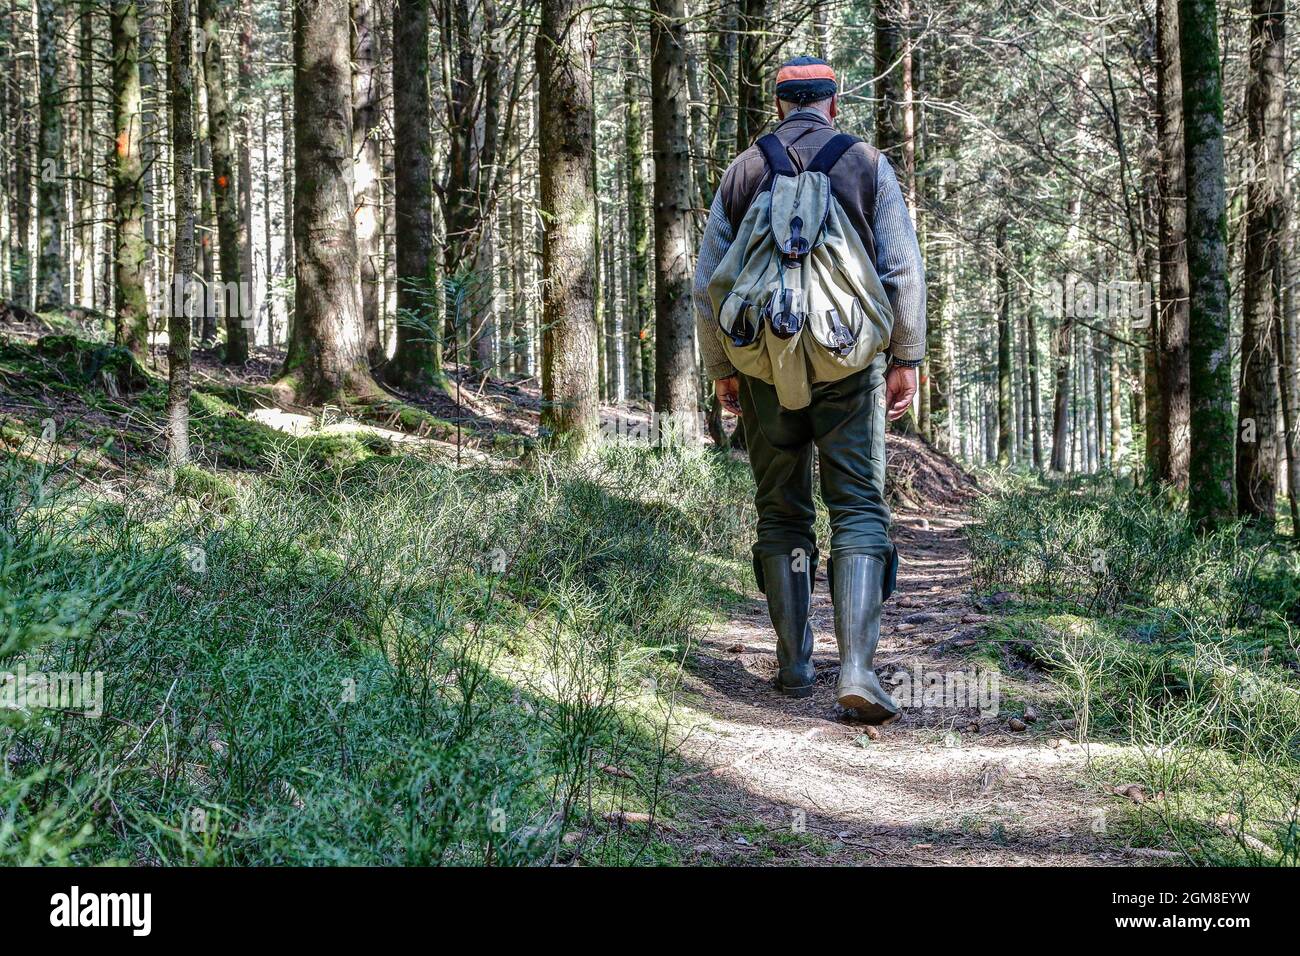 On a narrow path close to nature, a hiker walks through the typical Black Forest landscape. Stock Photo